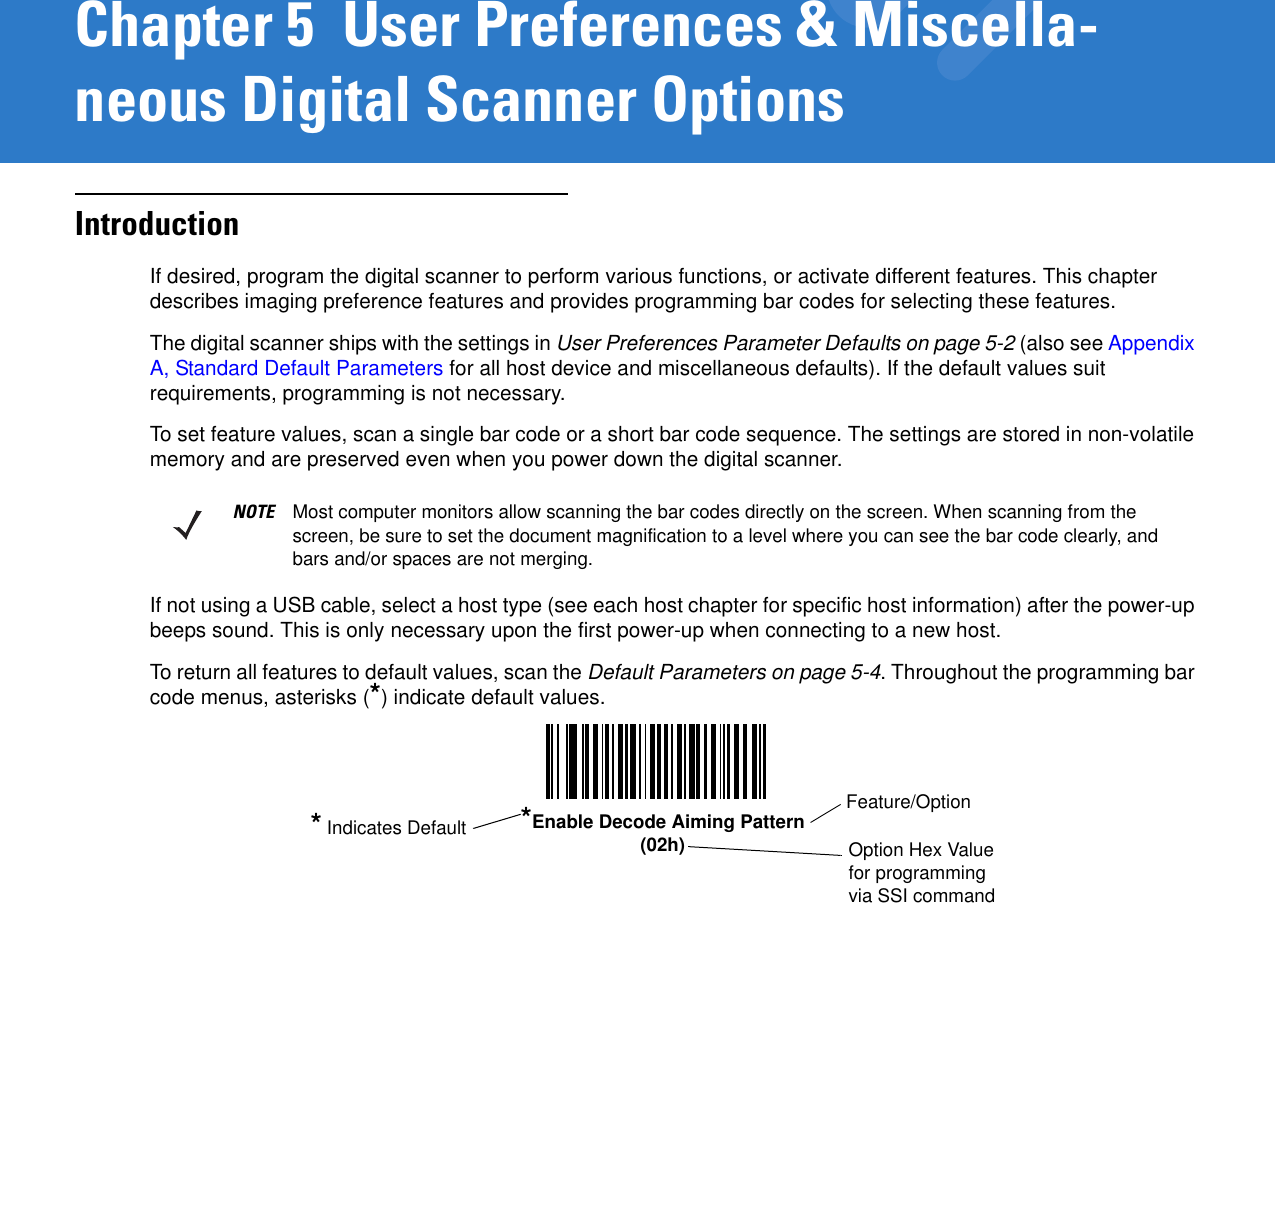 Chapter 5  User Preferences &amp; Miscella-neous Digital Scanner OptionsIntroductionIf desired, program the digital scanner to perform various functions, or activate different features. This chapter describes imaging preference features and provides programming bar codes for selecting these features. The digital scanner ships with the settings in User Preferences Parameter Defaults on page 5-2 (also see Appendix A, Standard Default Parameters for all host device and miscellaneous defaults). If the default values suit requirements, programming is not necessary.To set feature values, scan a single bar code or a short bar code sequence. The settings are stored in non-volatile memory and are preserved even when you power down the digital scanner.If not using a USB cable, select a host type (see each host chapter for specific host information) after the power-up beeps sound. This is only necessary upon the first power-up when connecting to a new host.To return all features to default values, scan the Default Parameters on page 5-4. Throughout the programming bar code menus, asterisks (*) indicate default values.NOTE Most computer monitors allow scanning the bar codes directly on the screen. When scanning from the screen, be sure to set the document magnification to a level where you can see the bar code clearly, and bars and/or spaces are not merging.Feature/Option* Indicates Default *Enable Decode Aiming Pattern(02h) Option Hex Value for programming via SSI command